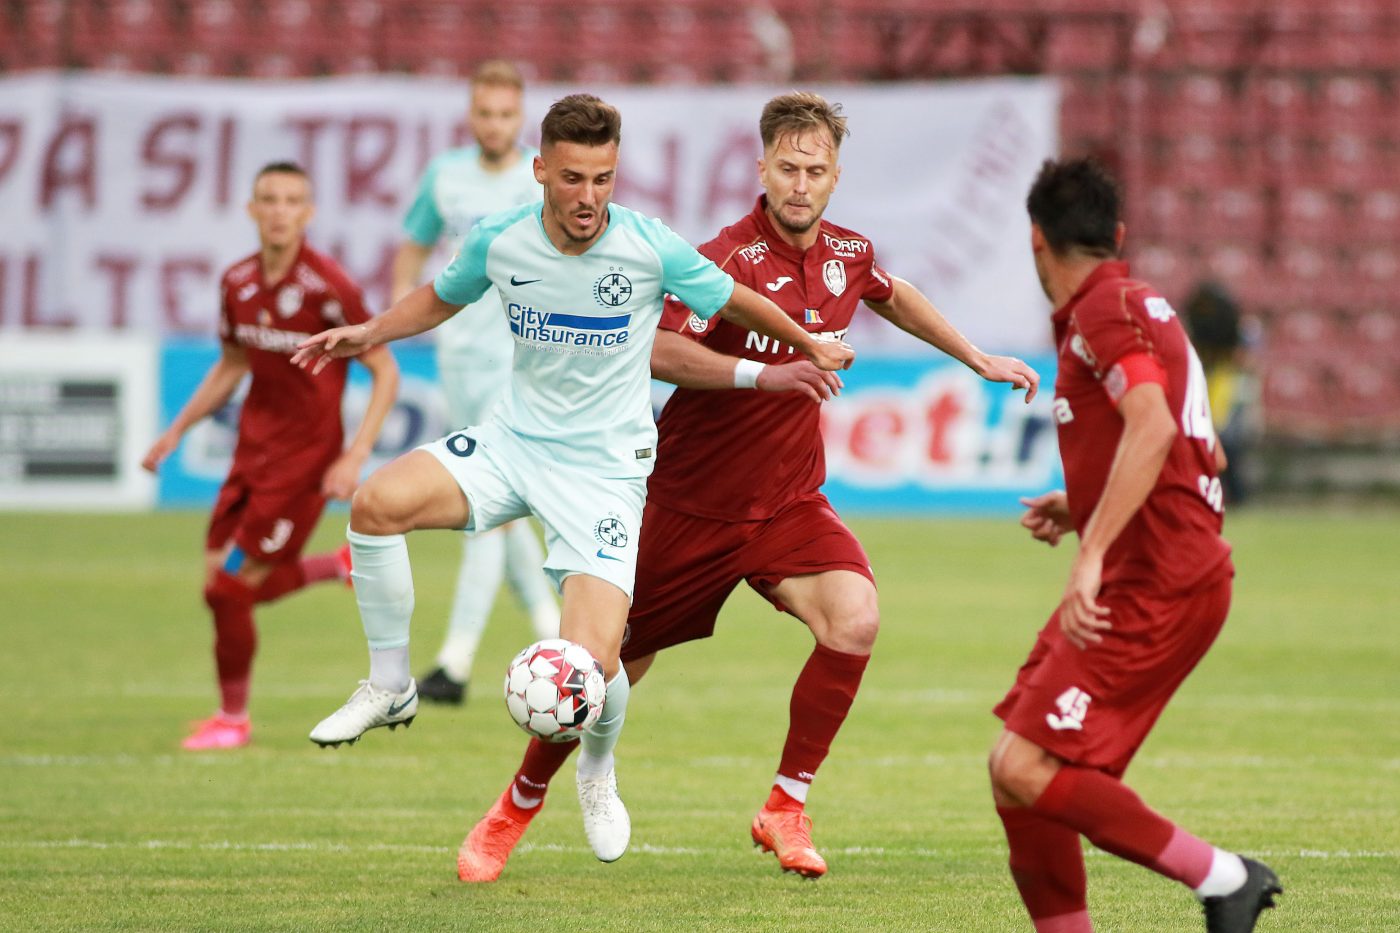 Fcsb Cfr Cluj Live Video Online From 21 30 In The 8th Round Of The League 1 Play Off MoruÈ›an The Only Star Of The Red Blues Coman Is Just On The Bench Home